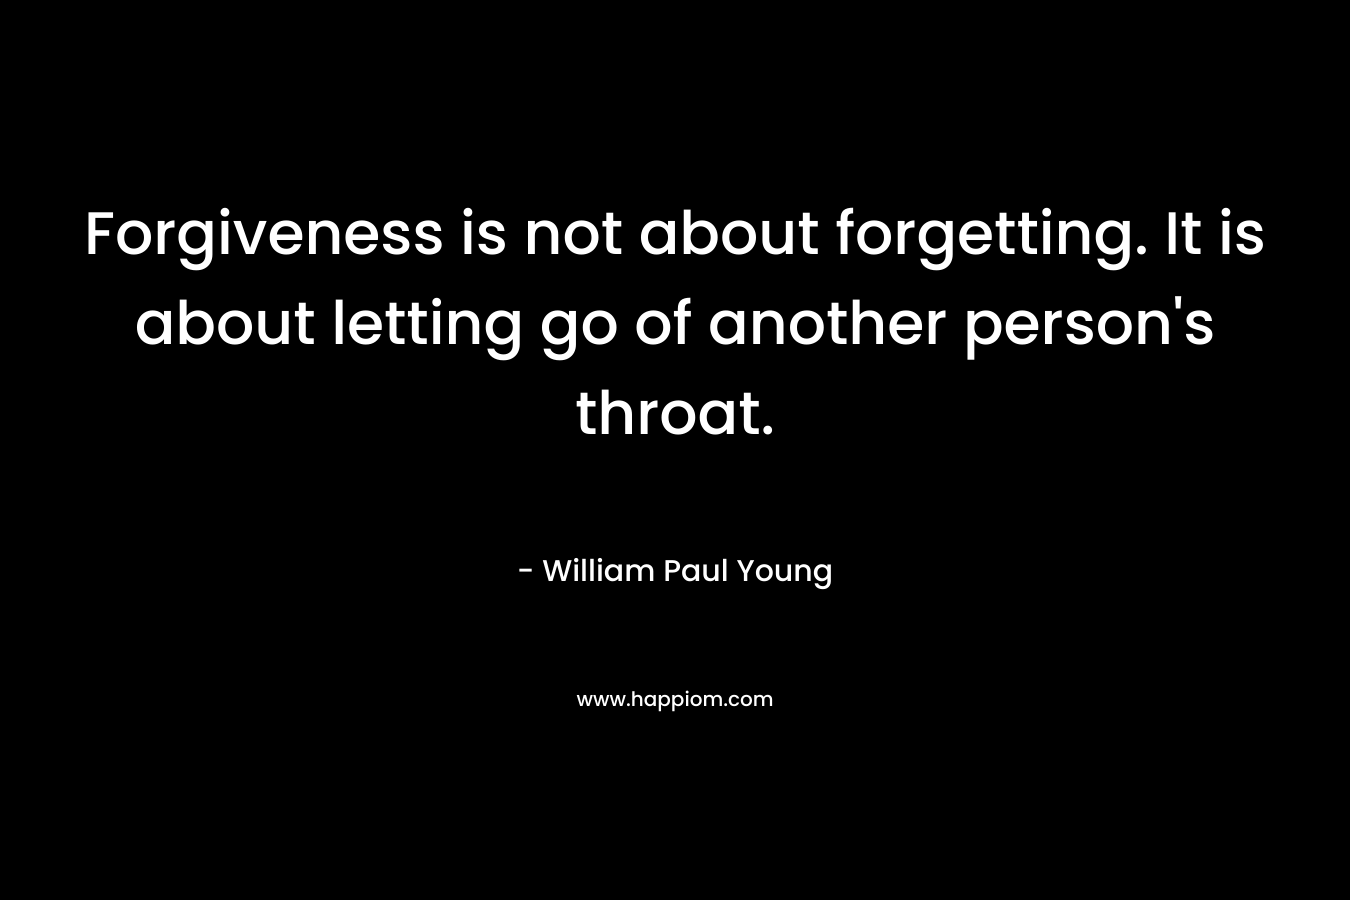 Forgiveness is not about forgetting. It is about letting go of another person's throat.